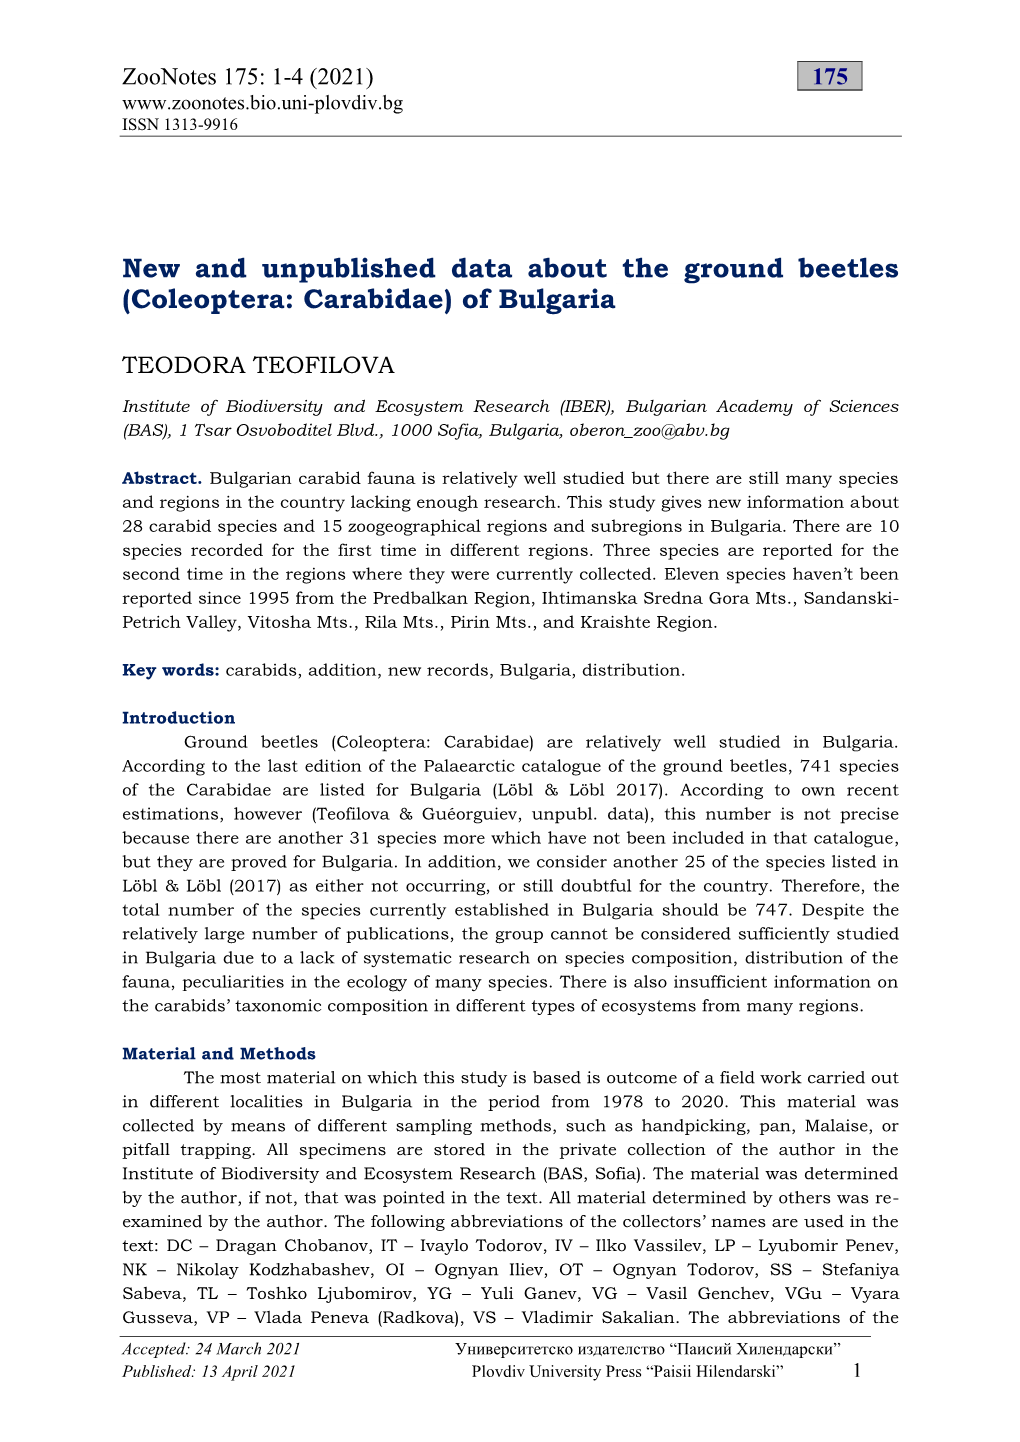 New and Unpublished Data About Bulgarian Ground Beetles of The